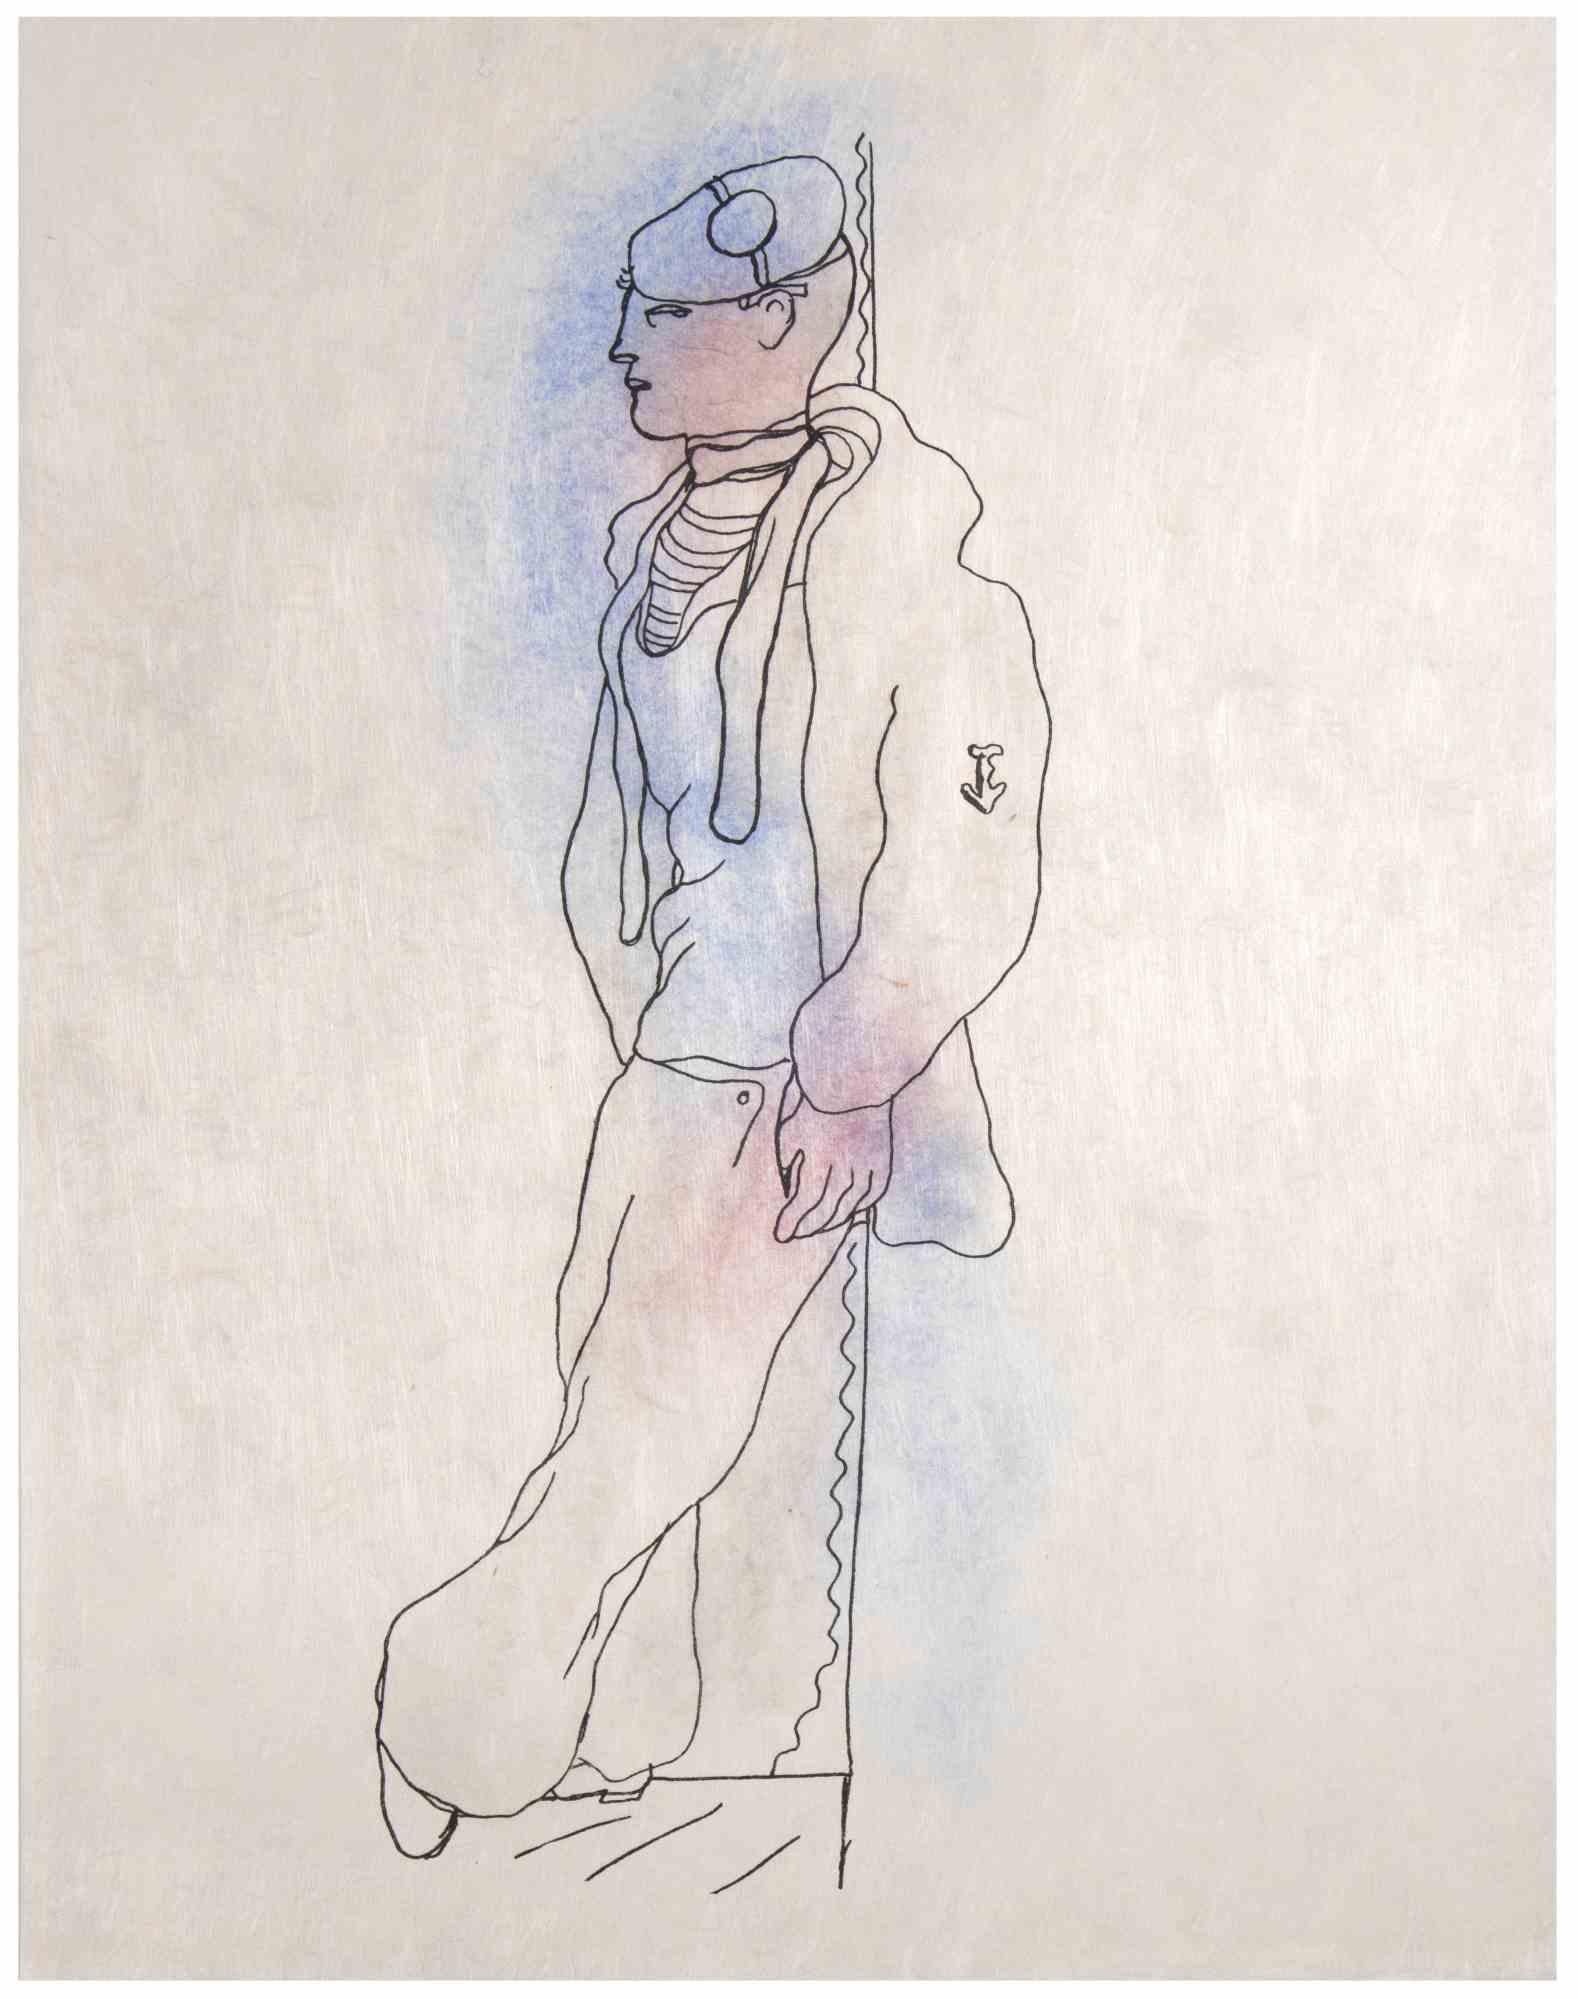 Figure is a Colored lithograph realized by Jean Cocteau (1889 -1963) in 1930 ca. 

French draftsman, poet, essayist, playwright, librettist, film director.

Not signed, Good conditions.

Jean Cocteau , influential french artist and writer, is a